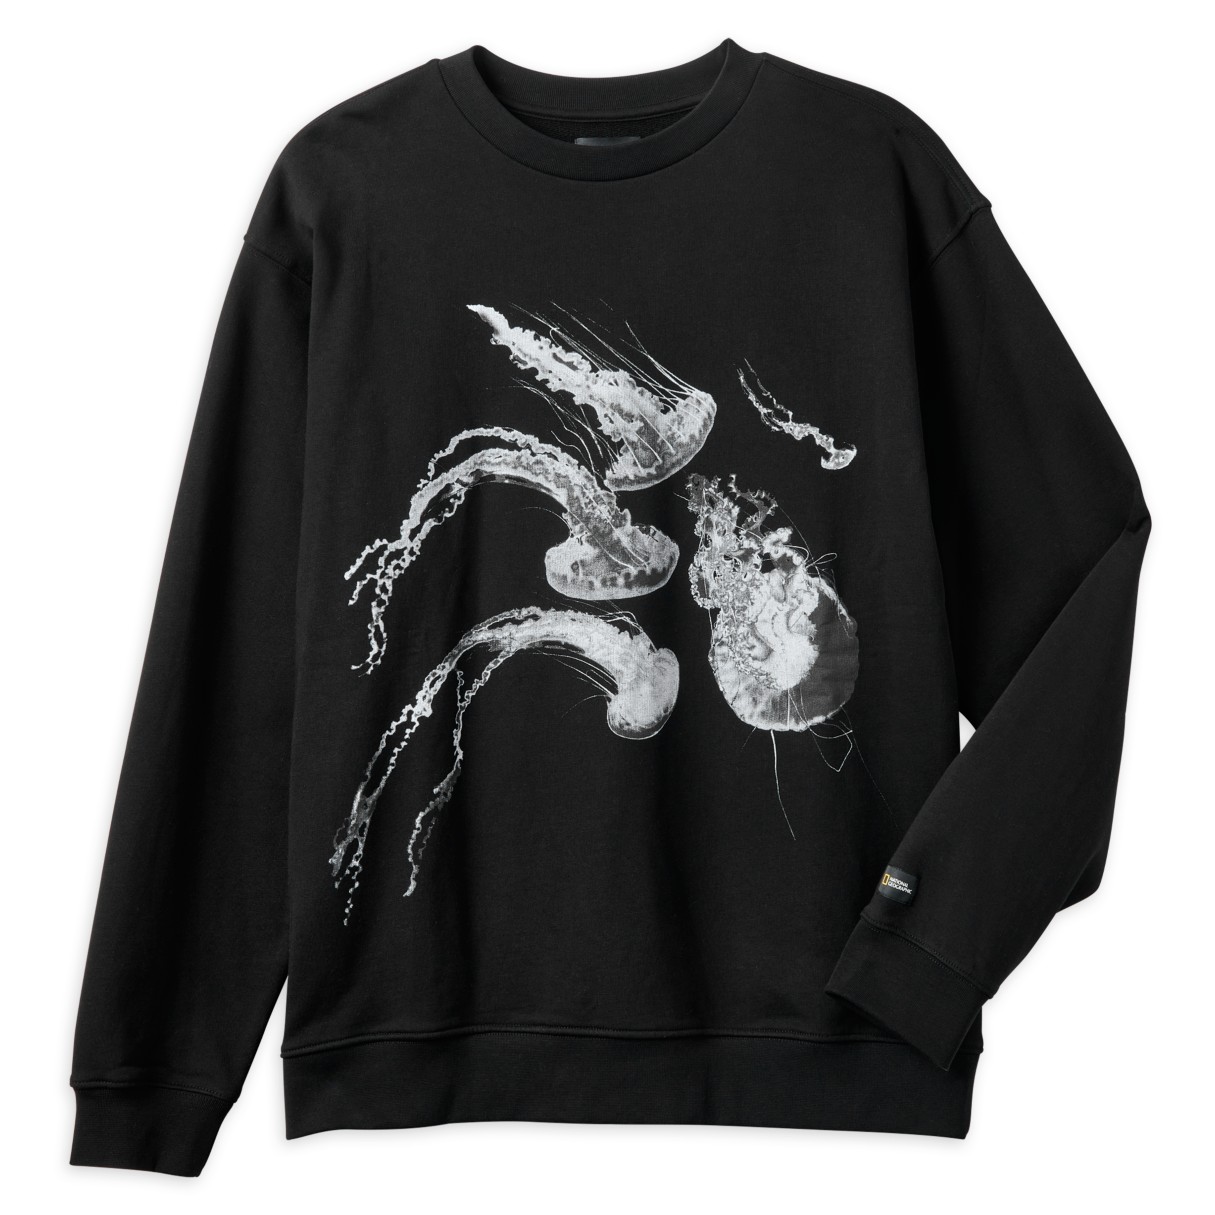 National Geographic Jellyfish Sweatshirt for Adults